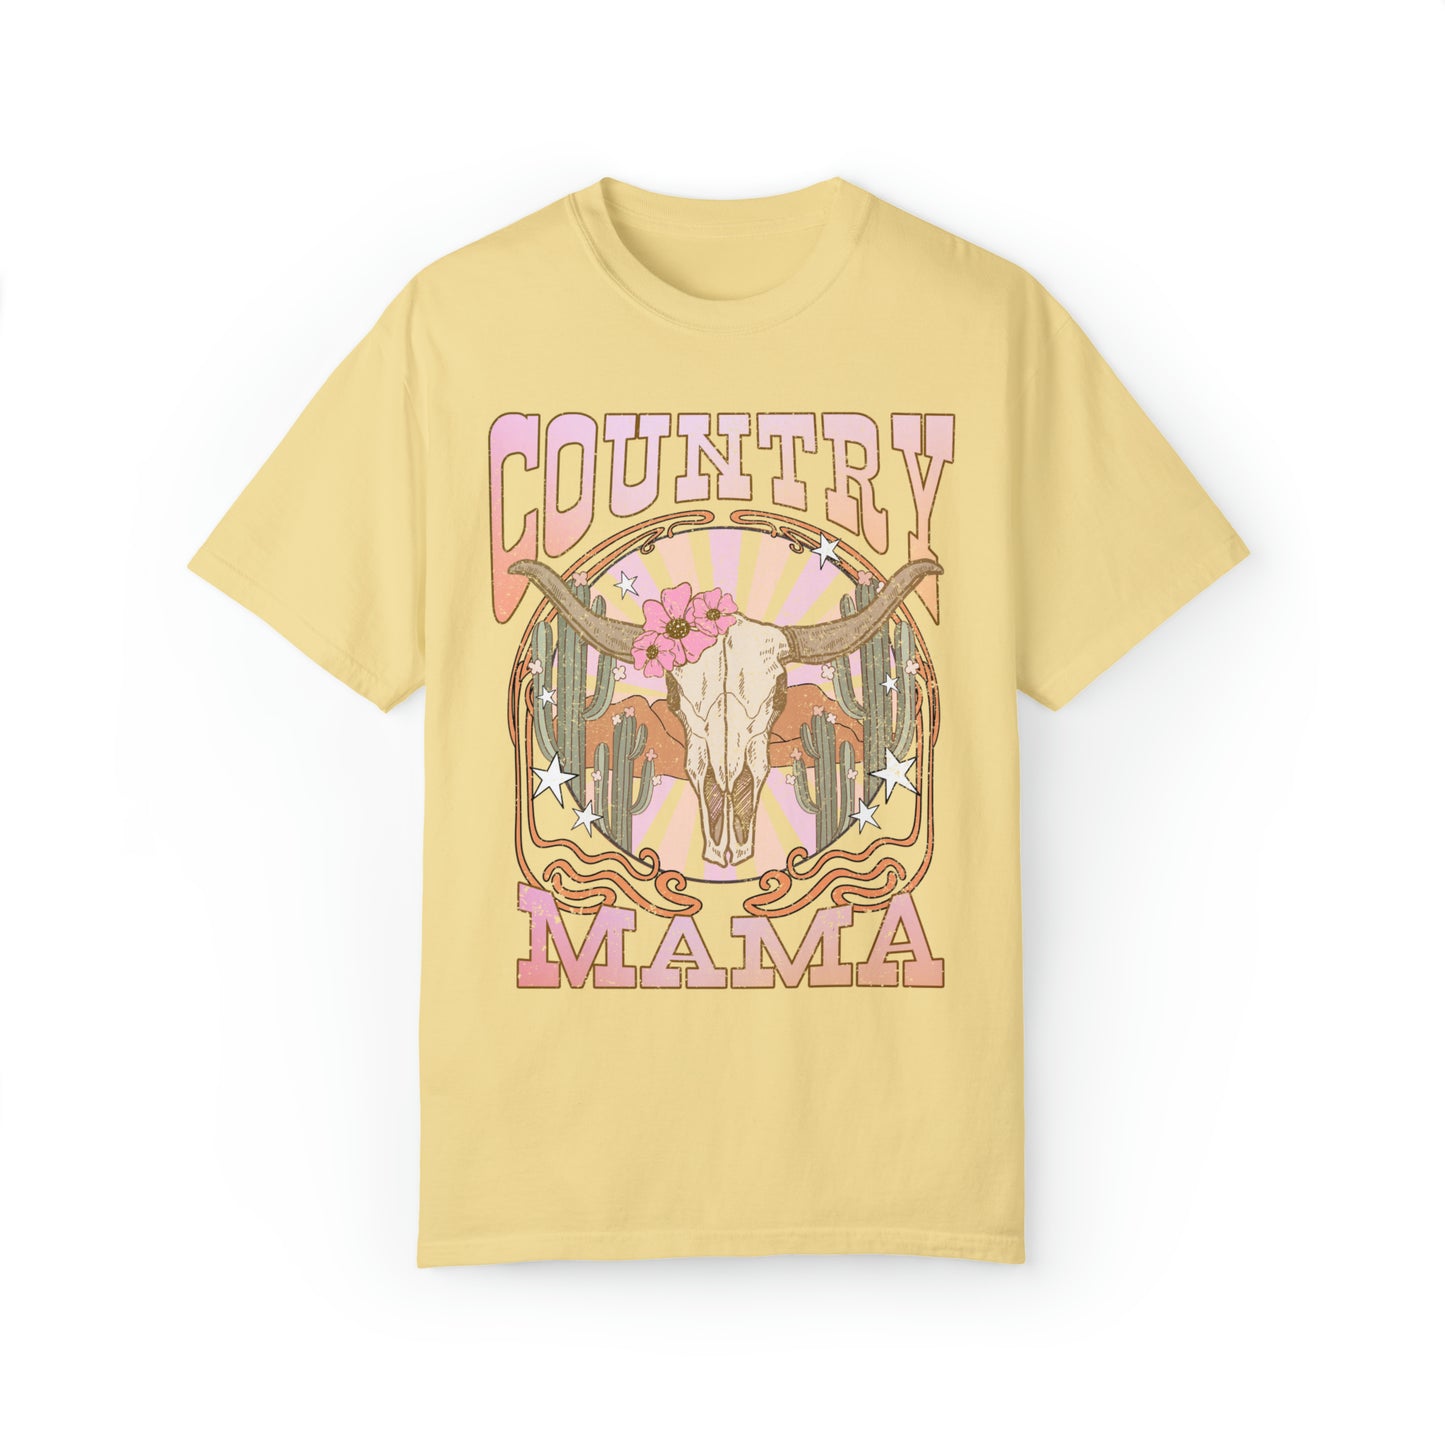 Country Mama Garment-Dyed T-shirt